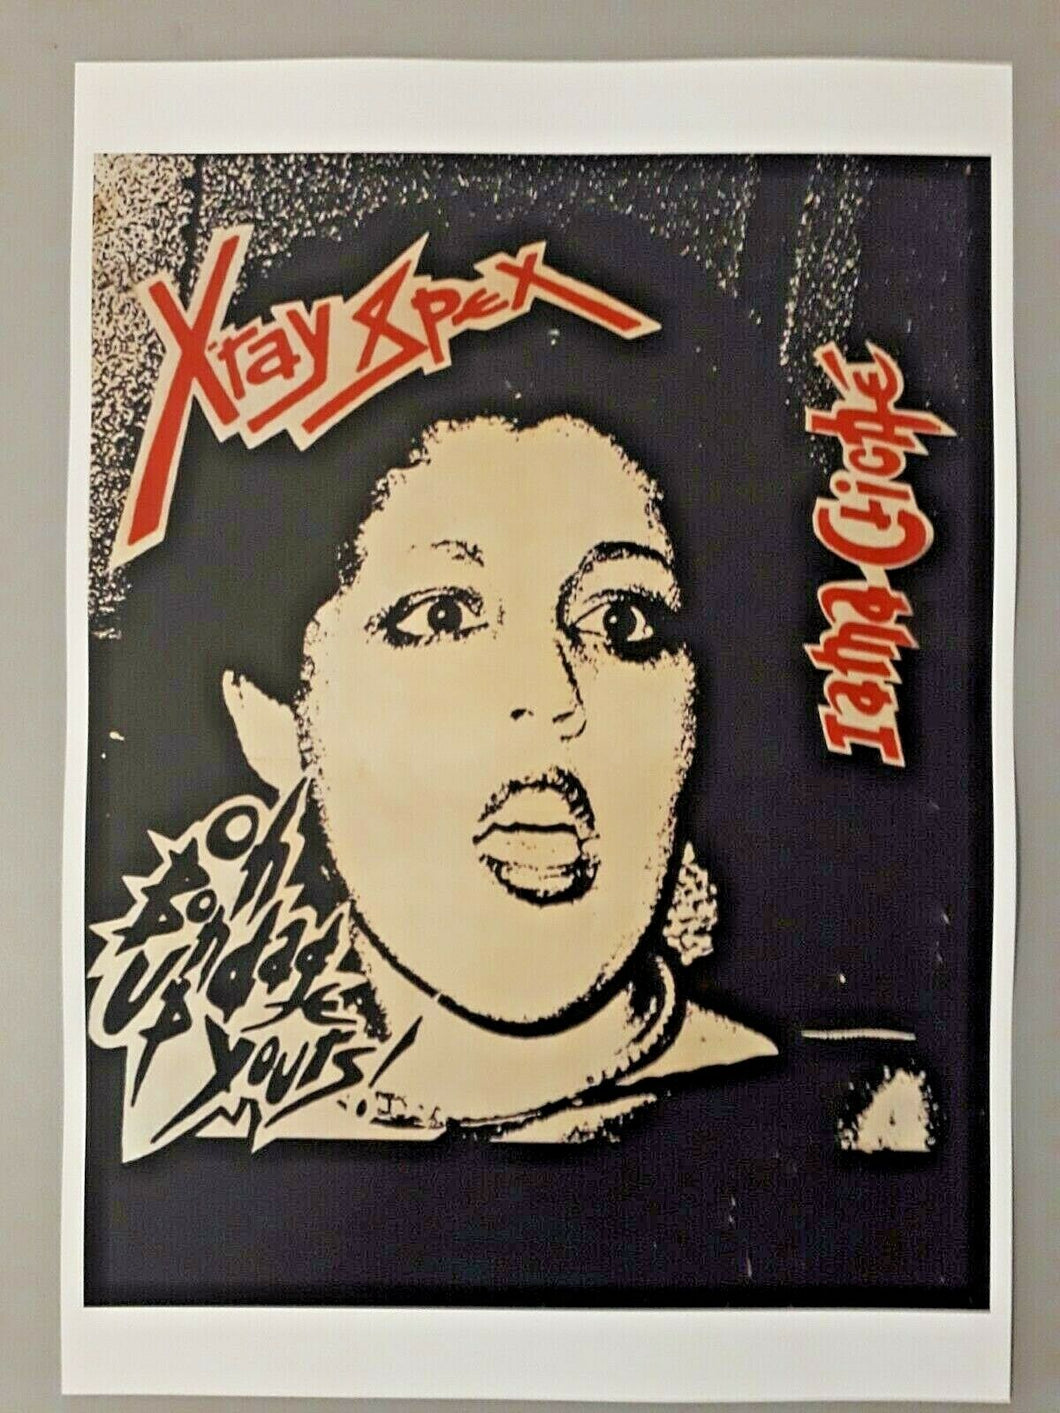 XRay Spex poster - Oh Bondage Up Yours! promotional release 77 A3 reprint - Original Music and Movie Posters for sale from Bamalama - Online Poster Store UK London